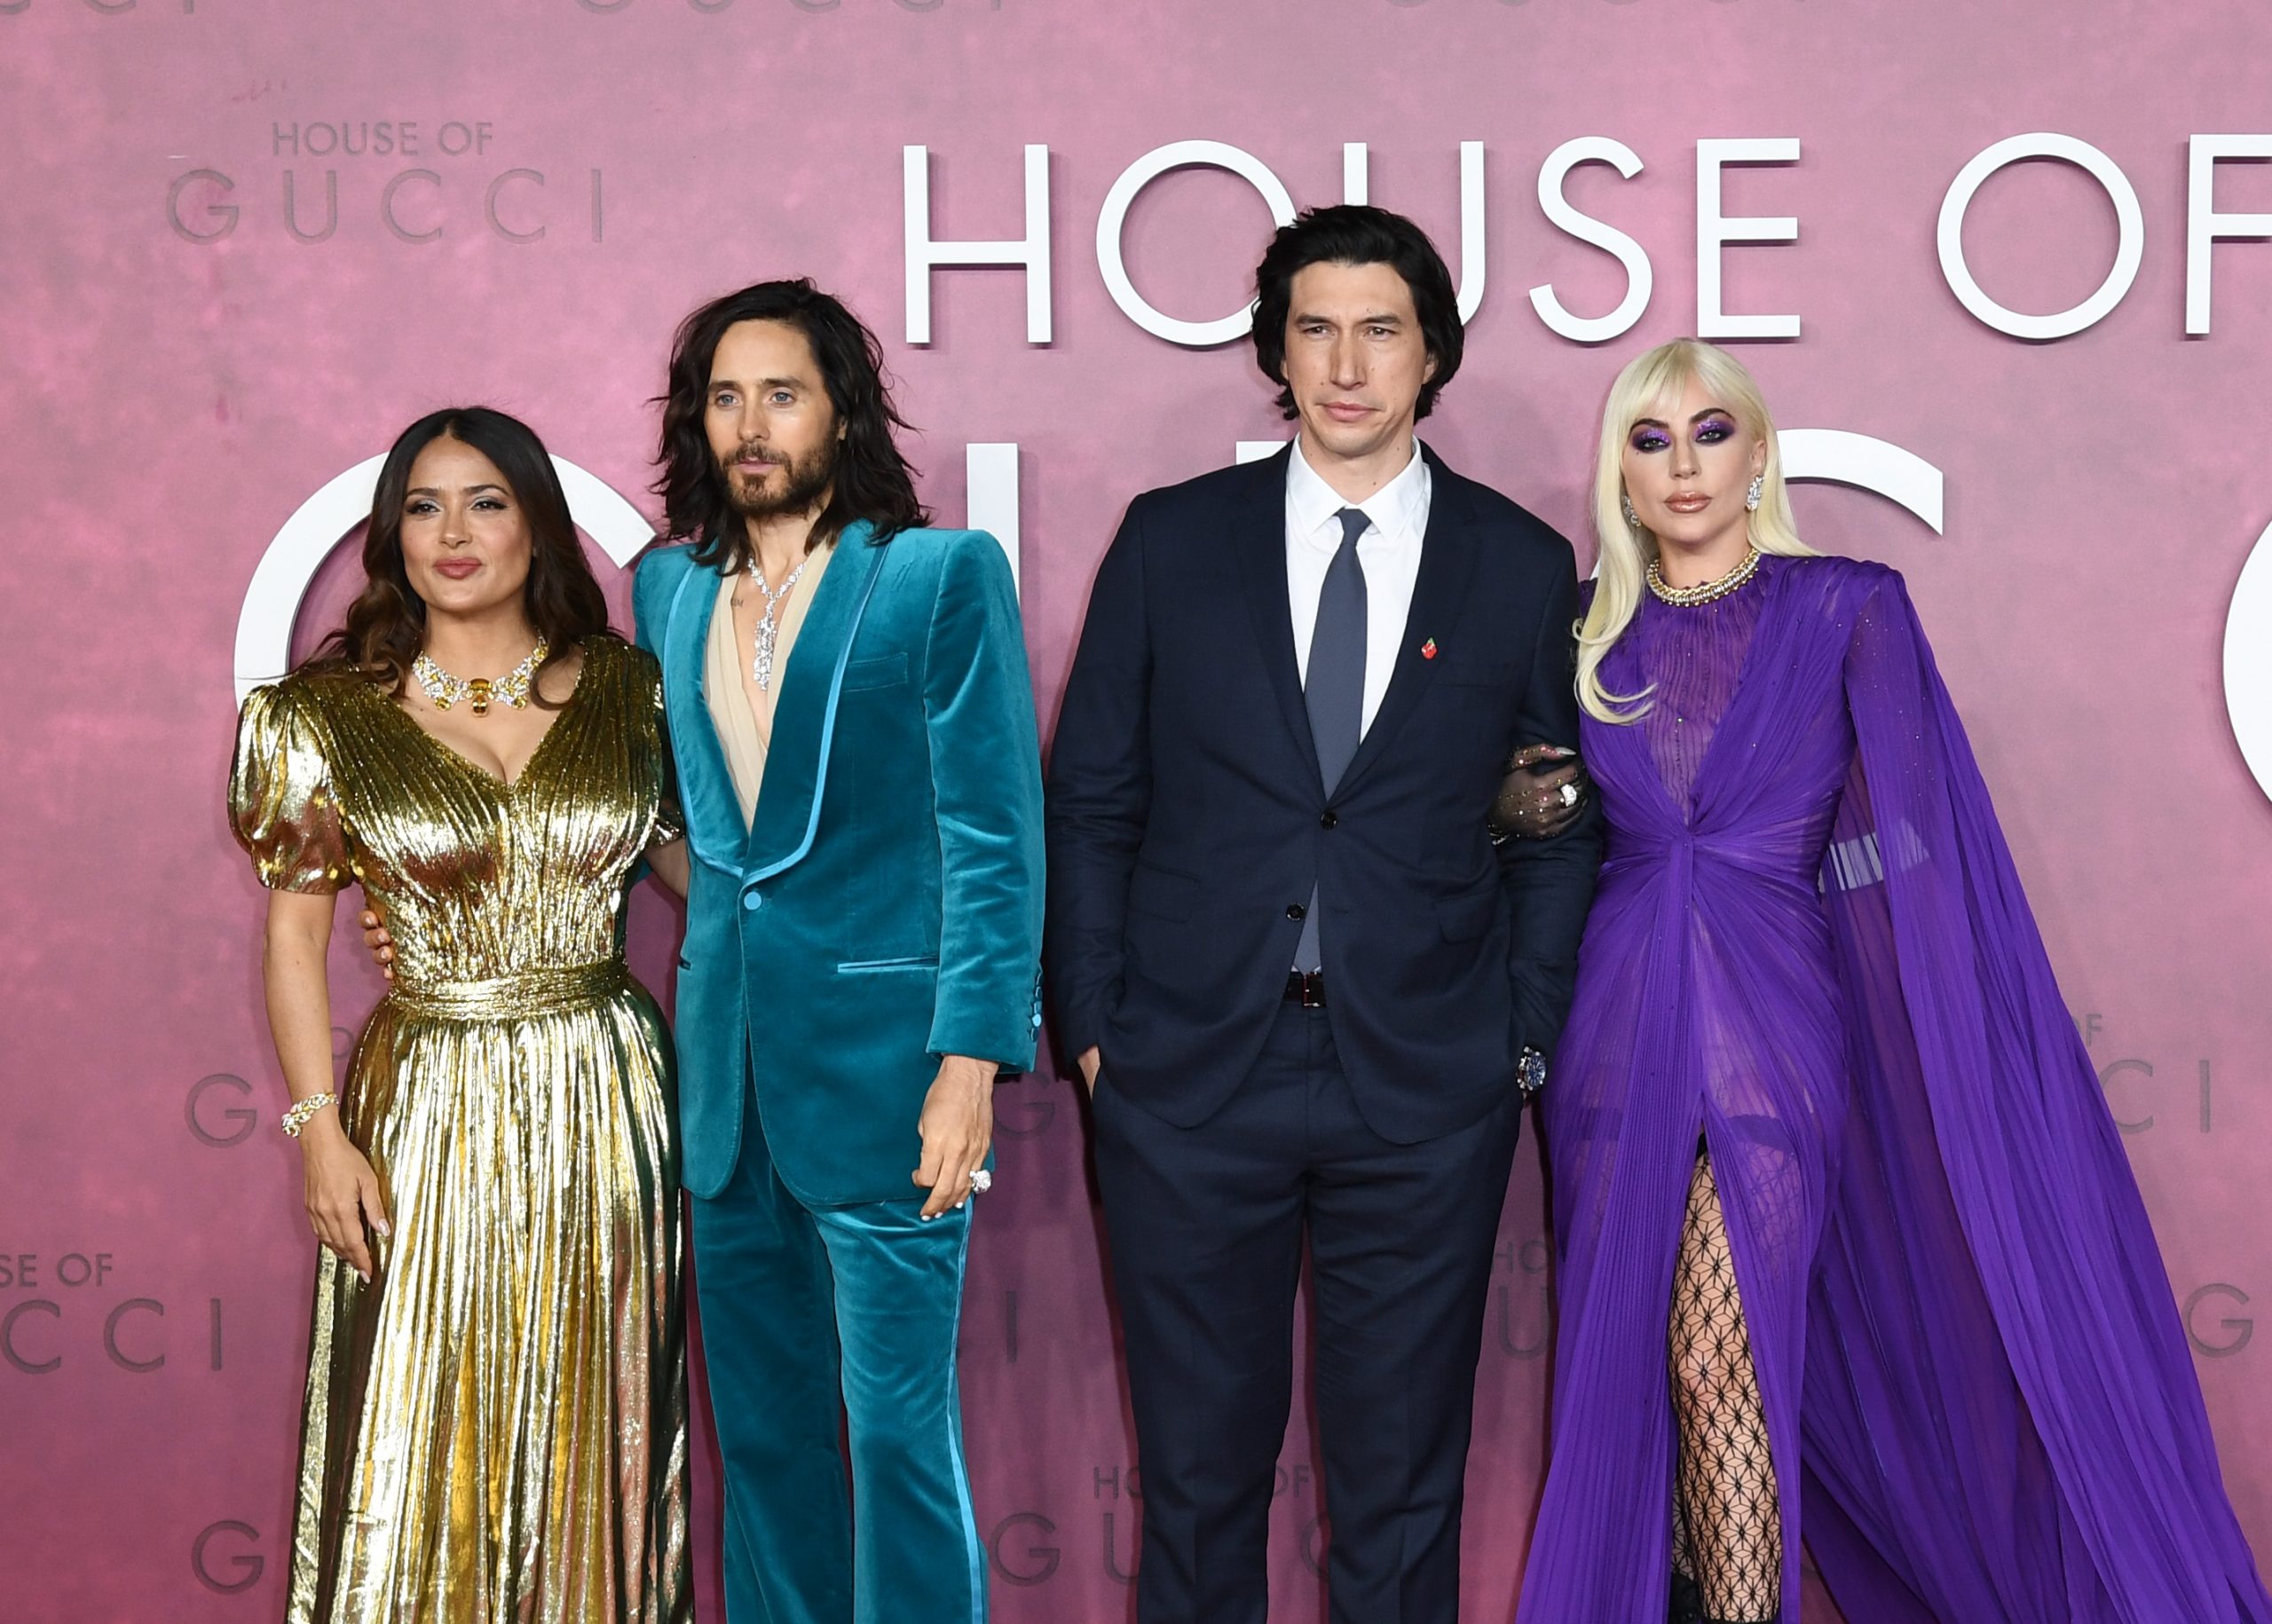 LONDON, ENGLAND - NOVEMBER 09:  (L-R) Salma Hayek, Jared Leto, Adam Driver and Lady Gaga attend the UK Premiere Of "House of Gucci" at Odeon Luxe Leicester Square on November 09, 2021 in London, England. (Photo by Gareth Cattermole/Getty Images for Metro-Goldwyn-Mayer Studios and Universal Pictures )